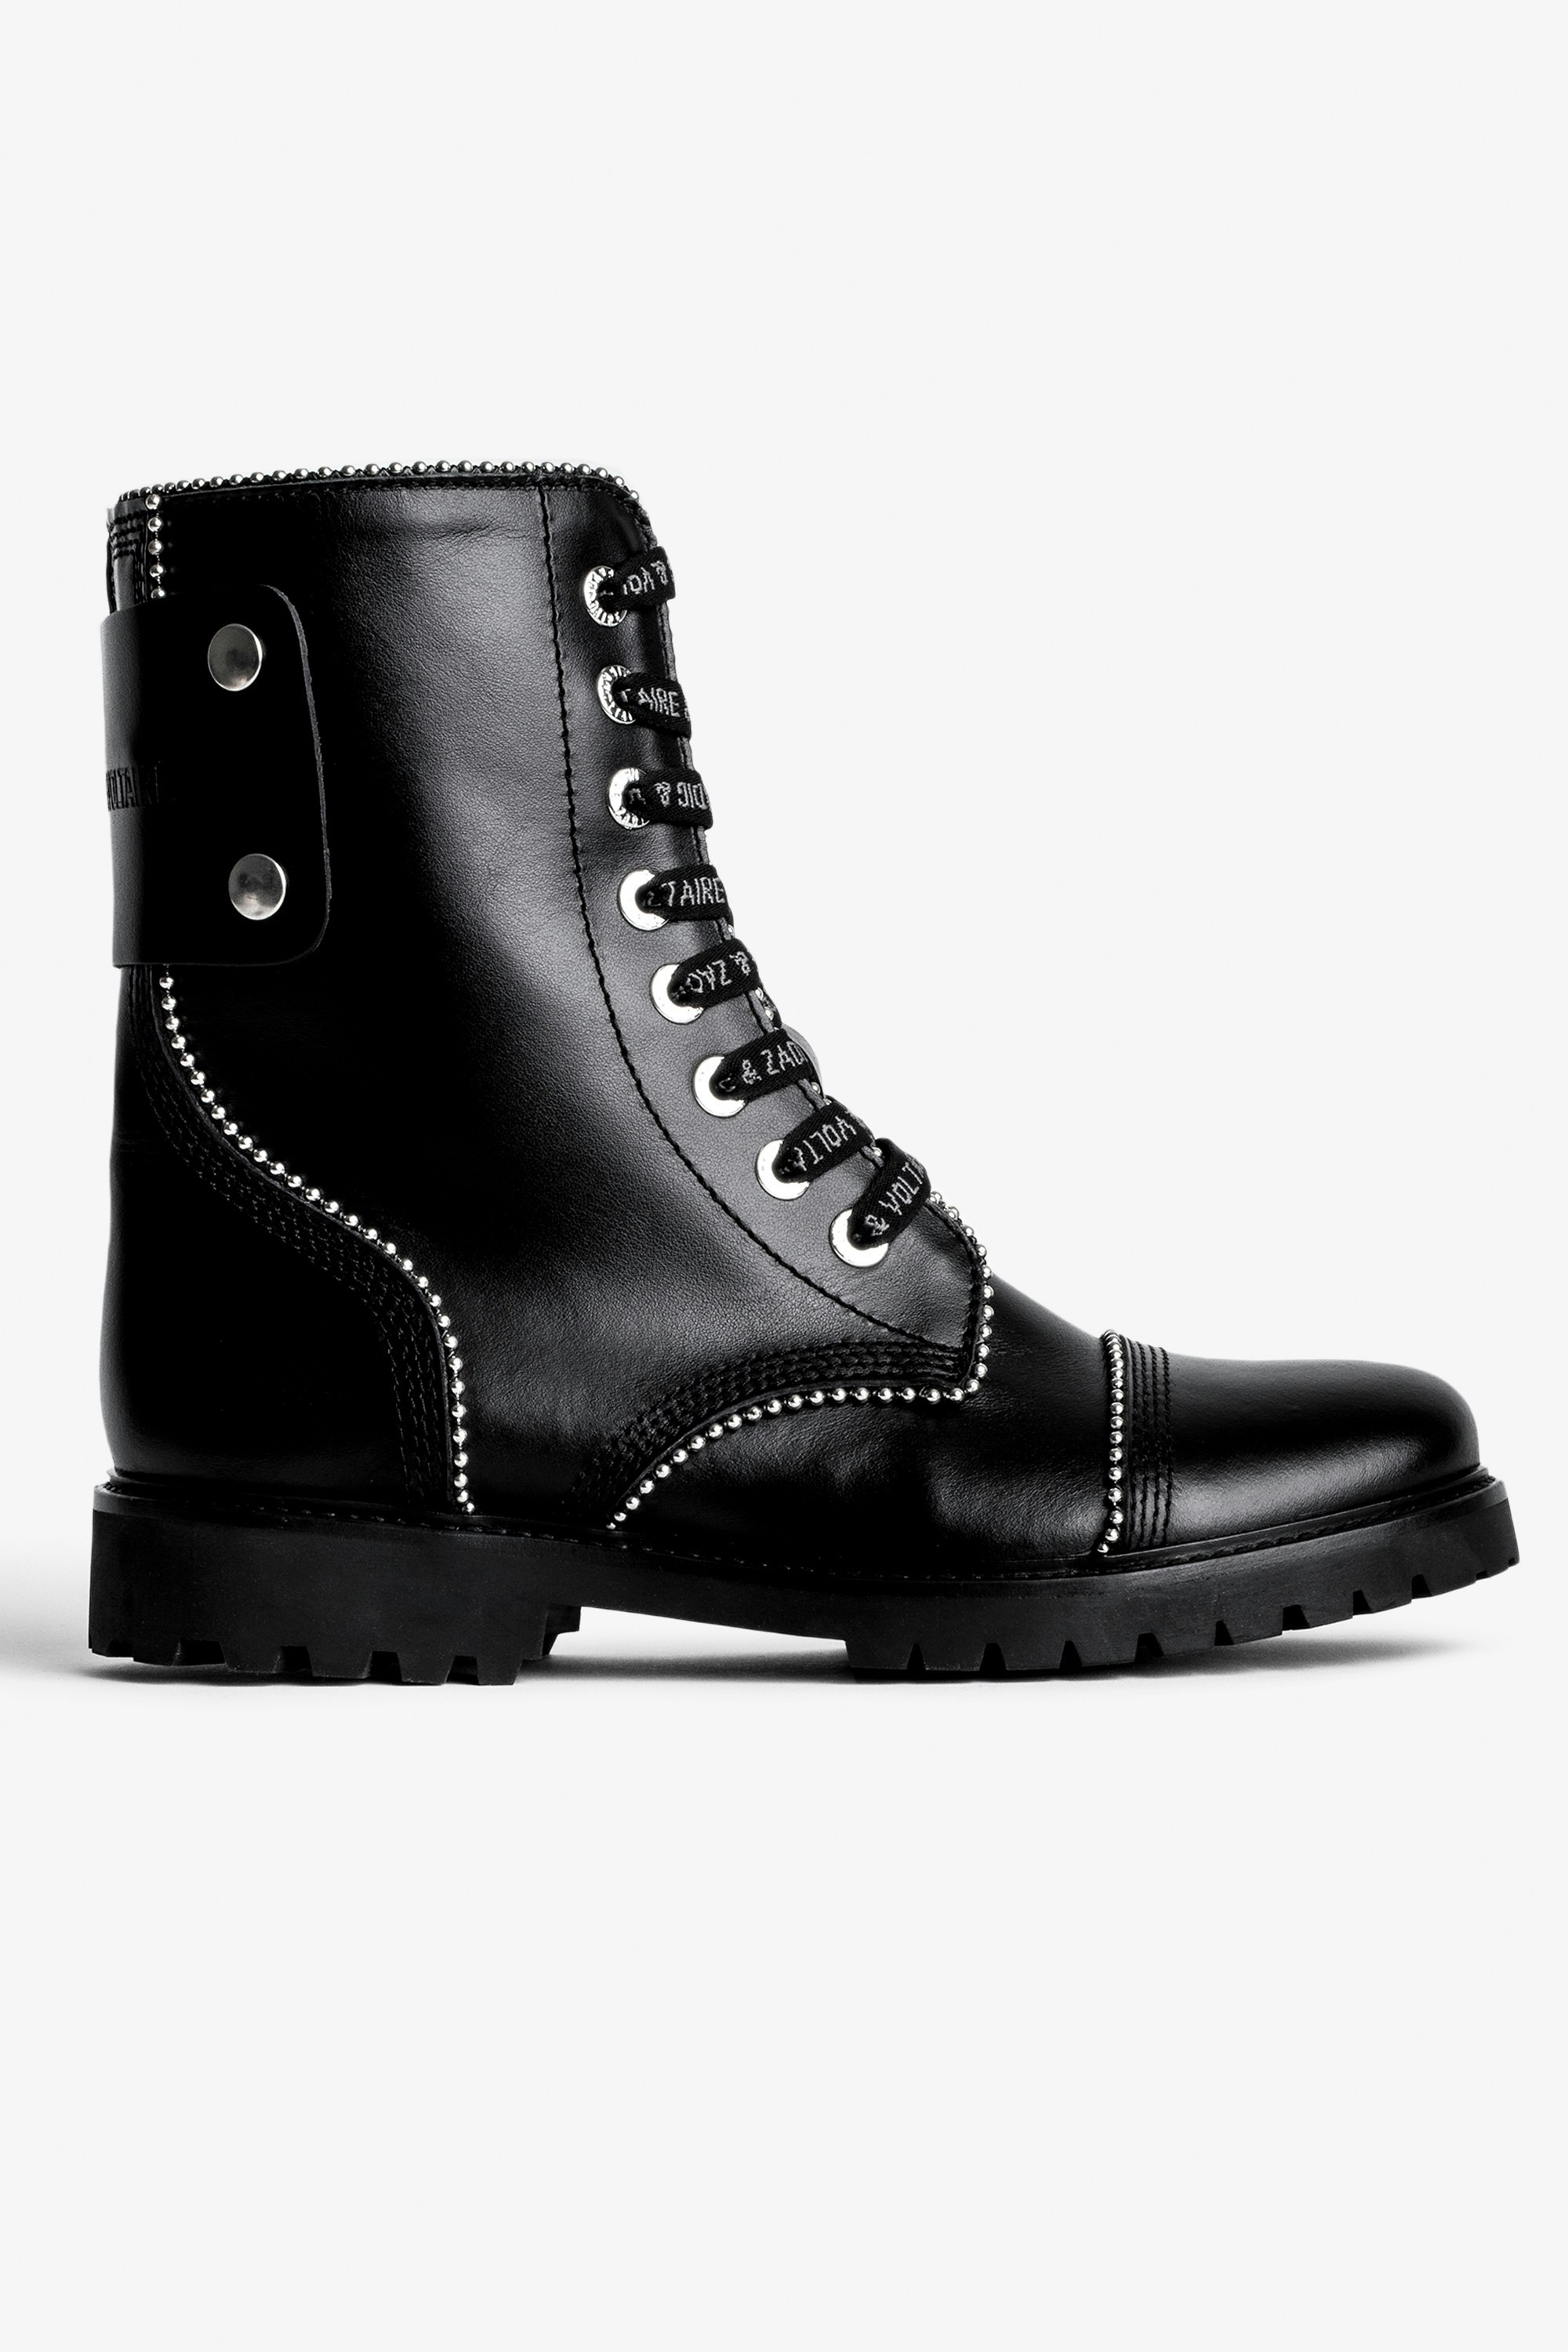 Joe Ankle レザーブーツ - Women's studded smooth black leather combat boots